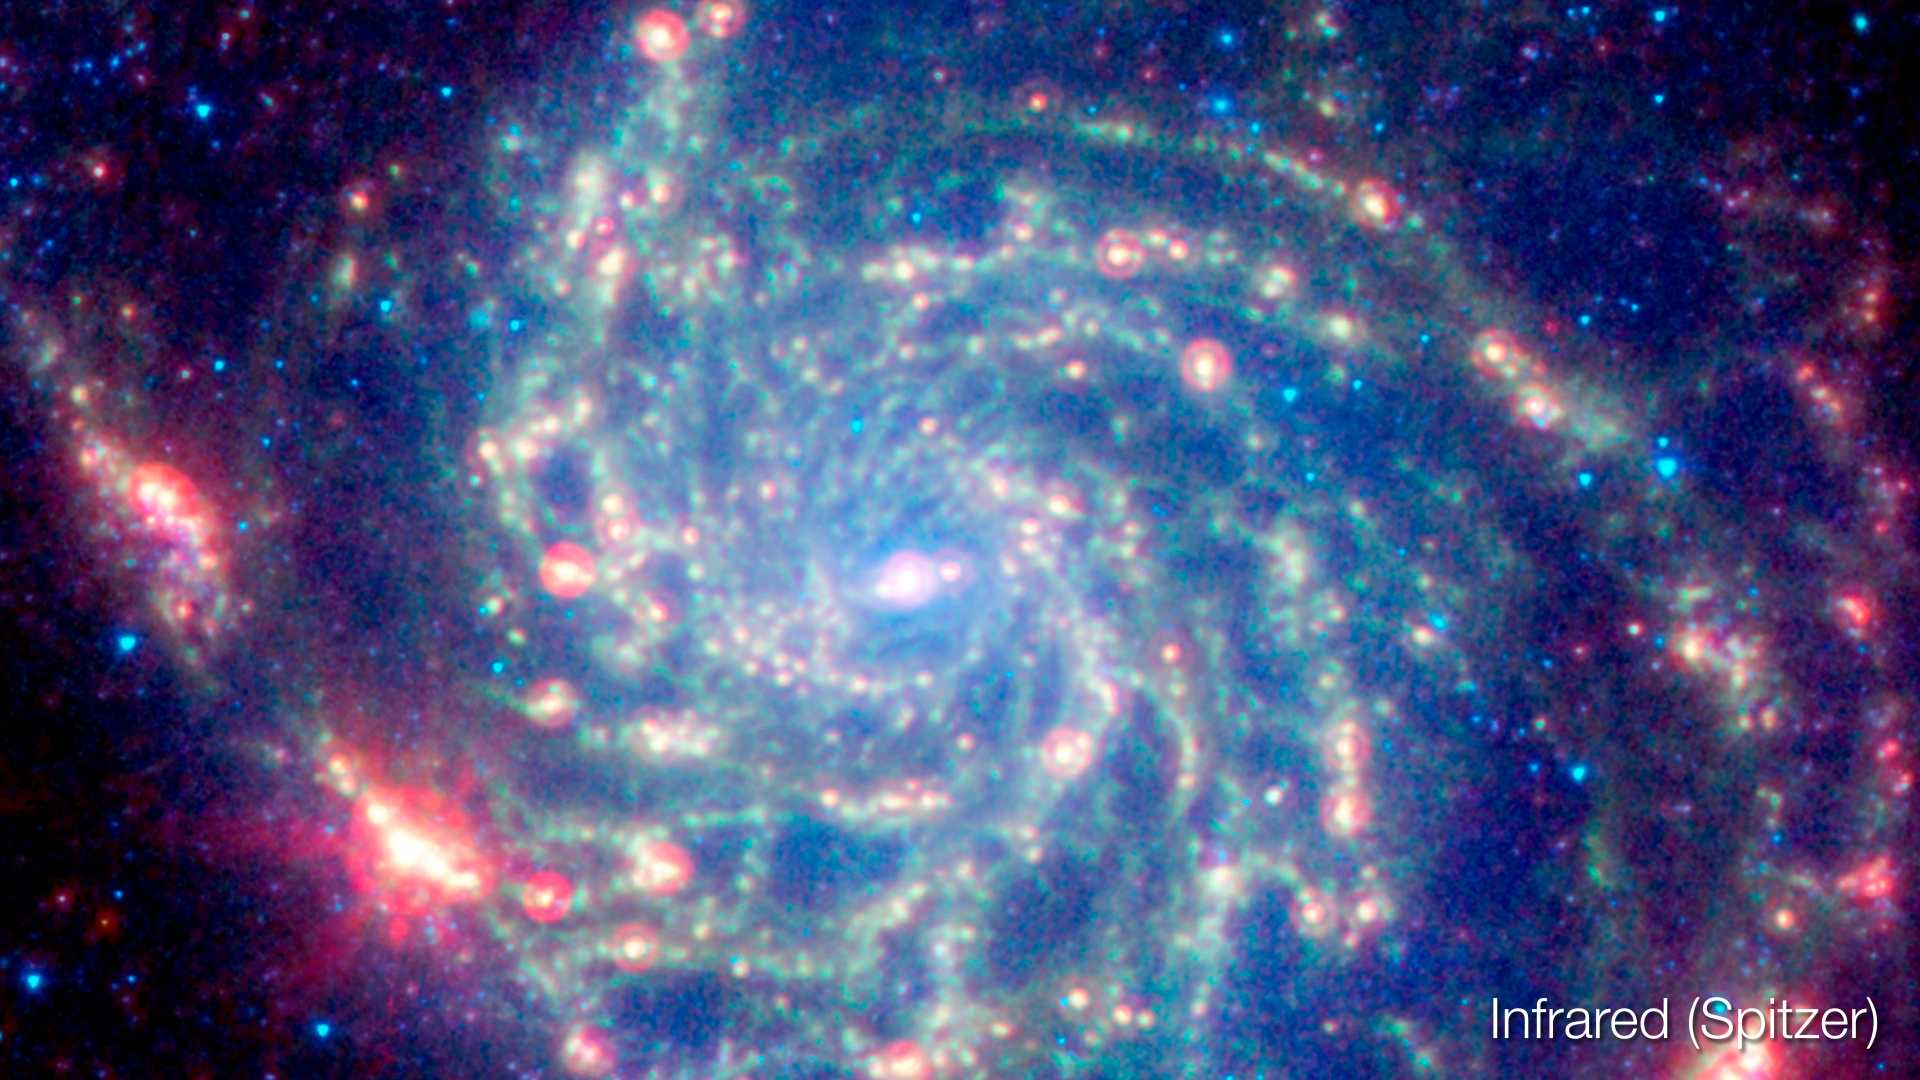 Spitzer Infrared image of M101 